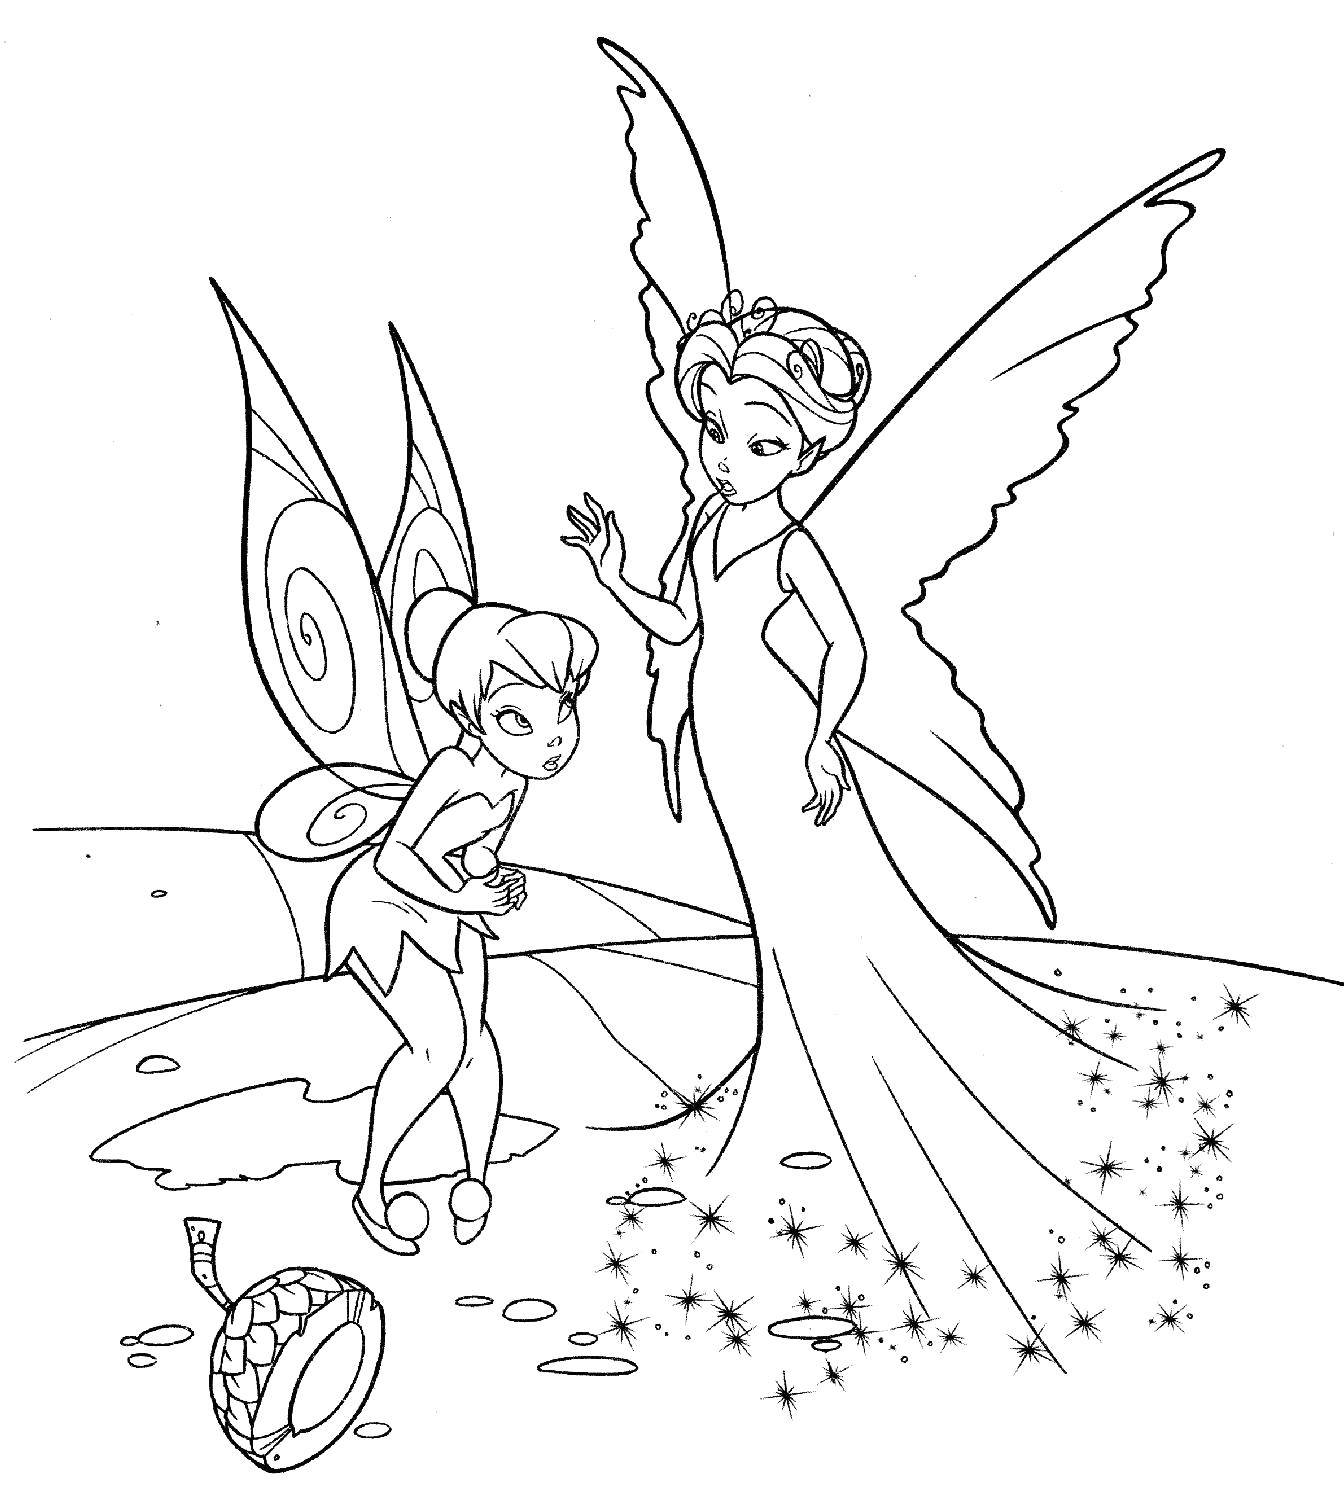 Coloring Tinker bell from disney fairies . Category Disney cartoons. Tags:  Fairy, tale.